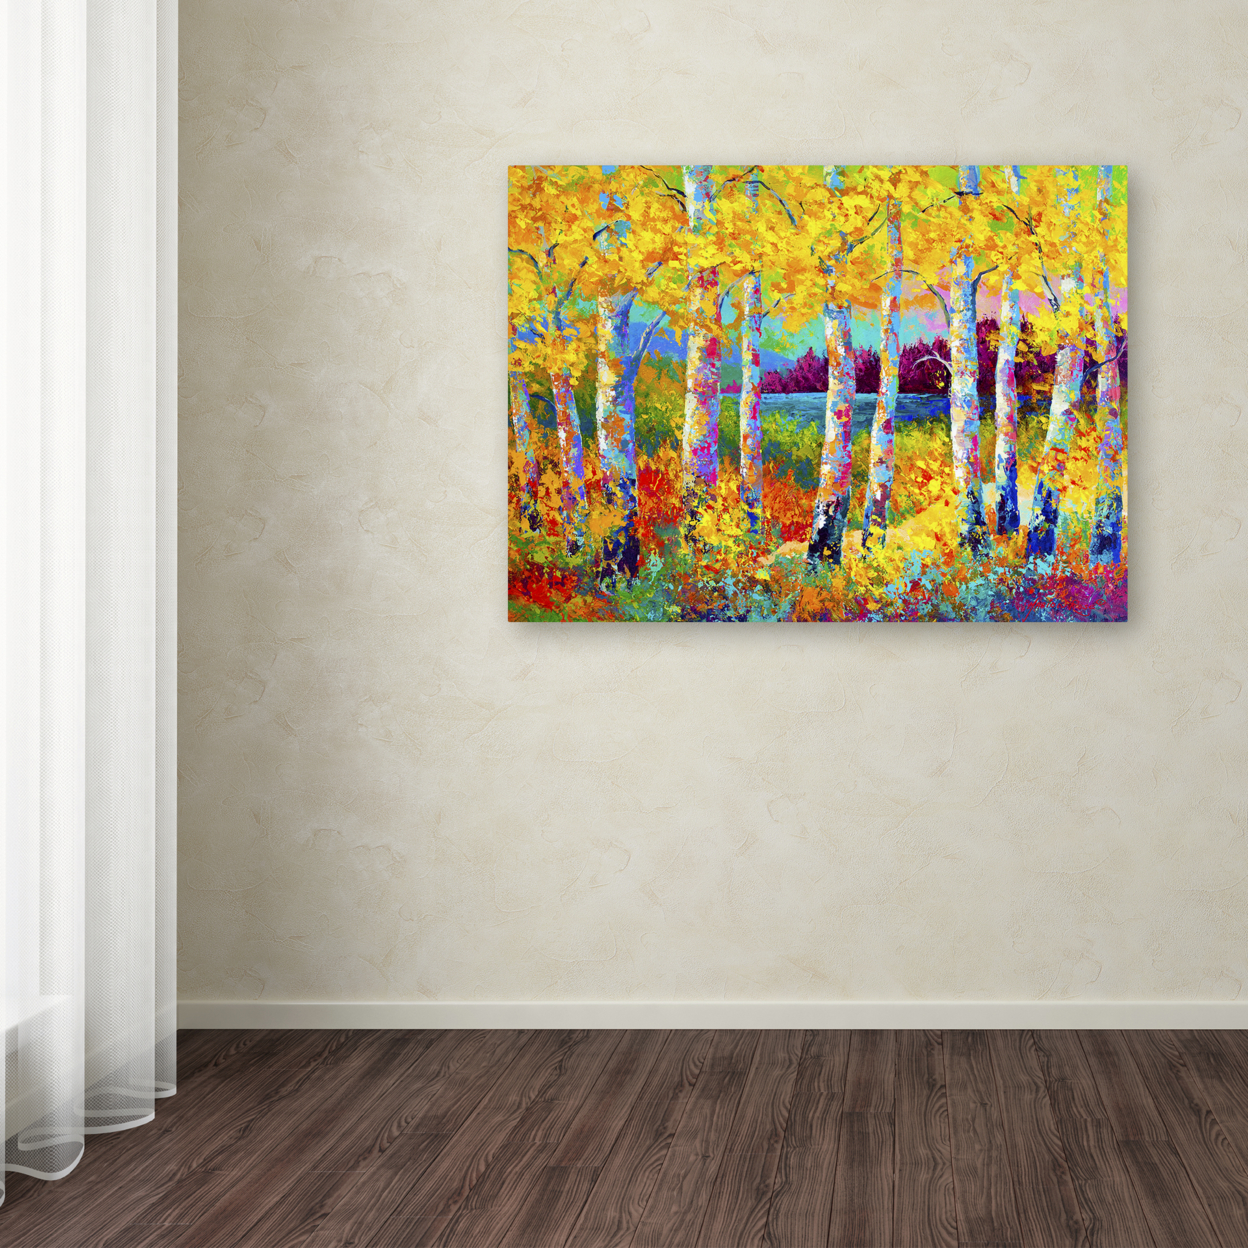 Marion Rose 'Autumn Jewels' Ready To Hang Canvas Art 24 X 32 Inches Made In USA